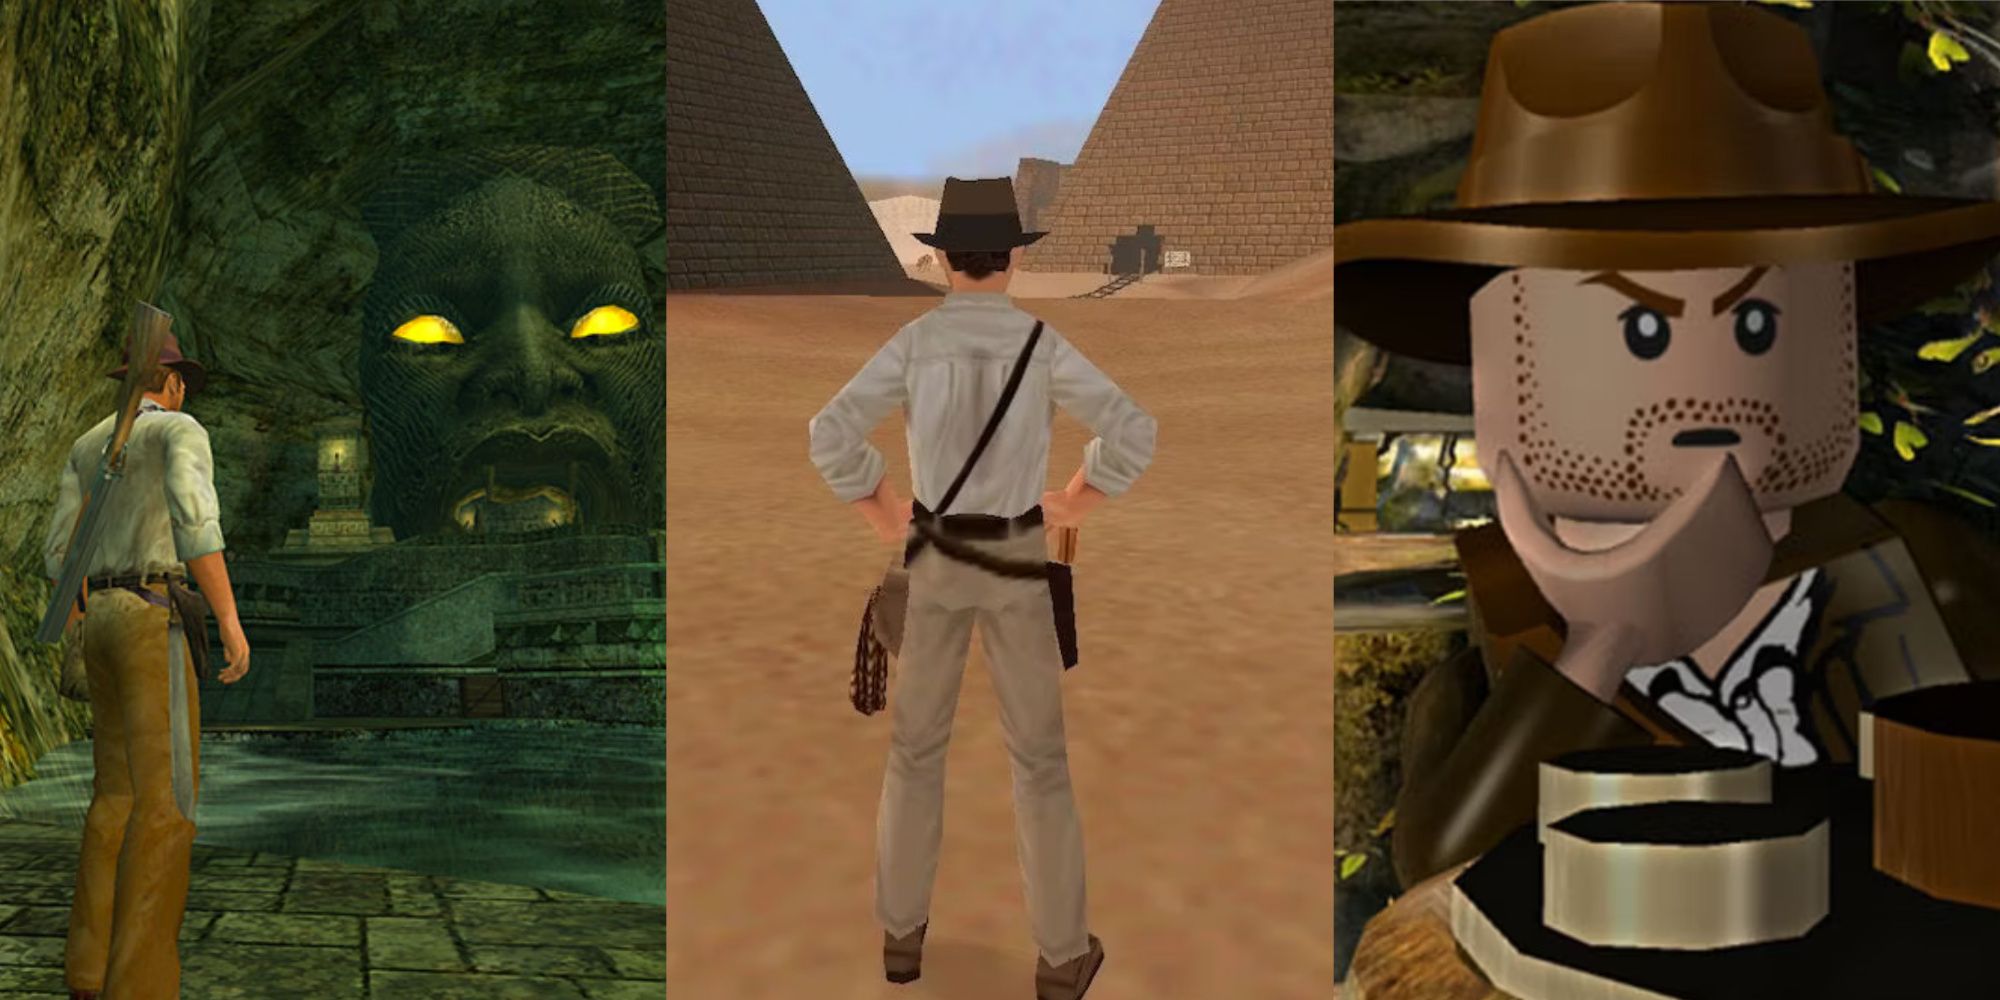 A collage showing three different games featuring Indiana Jones.